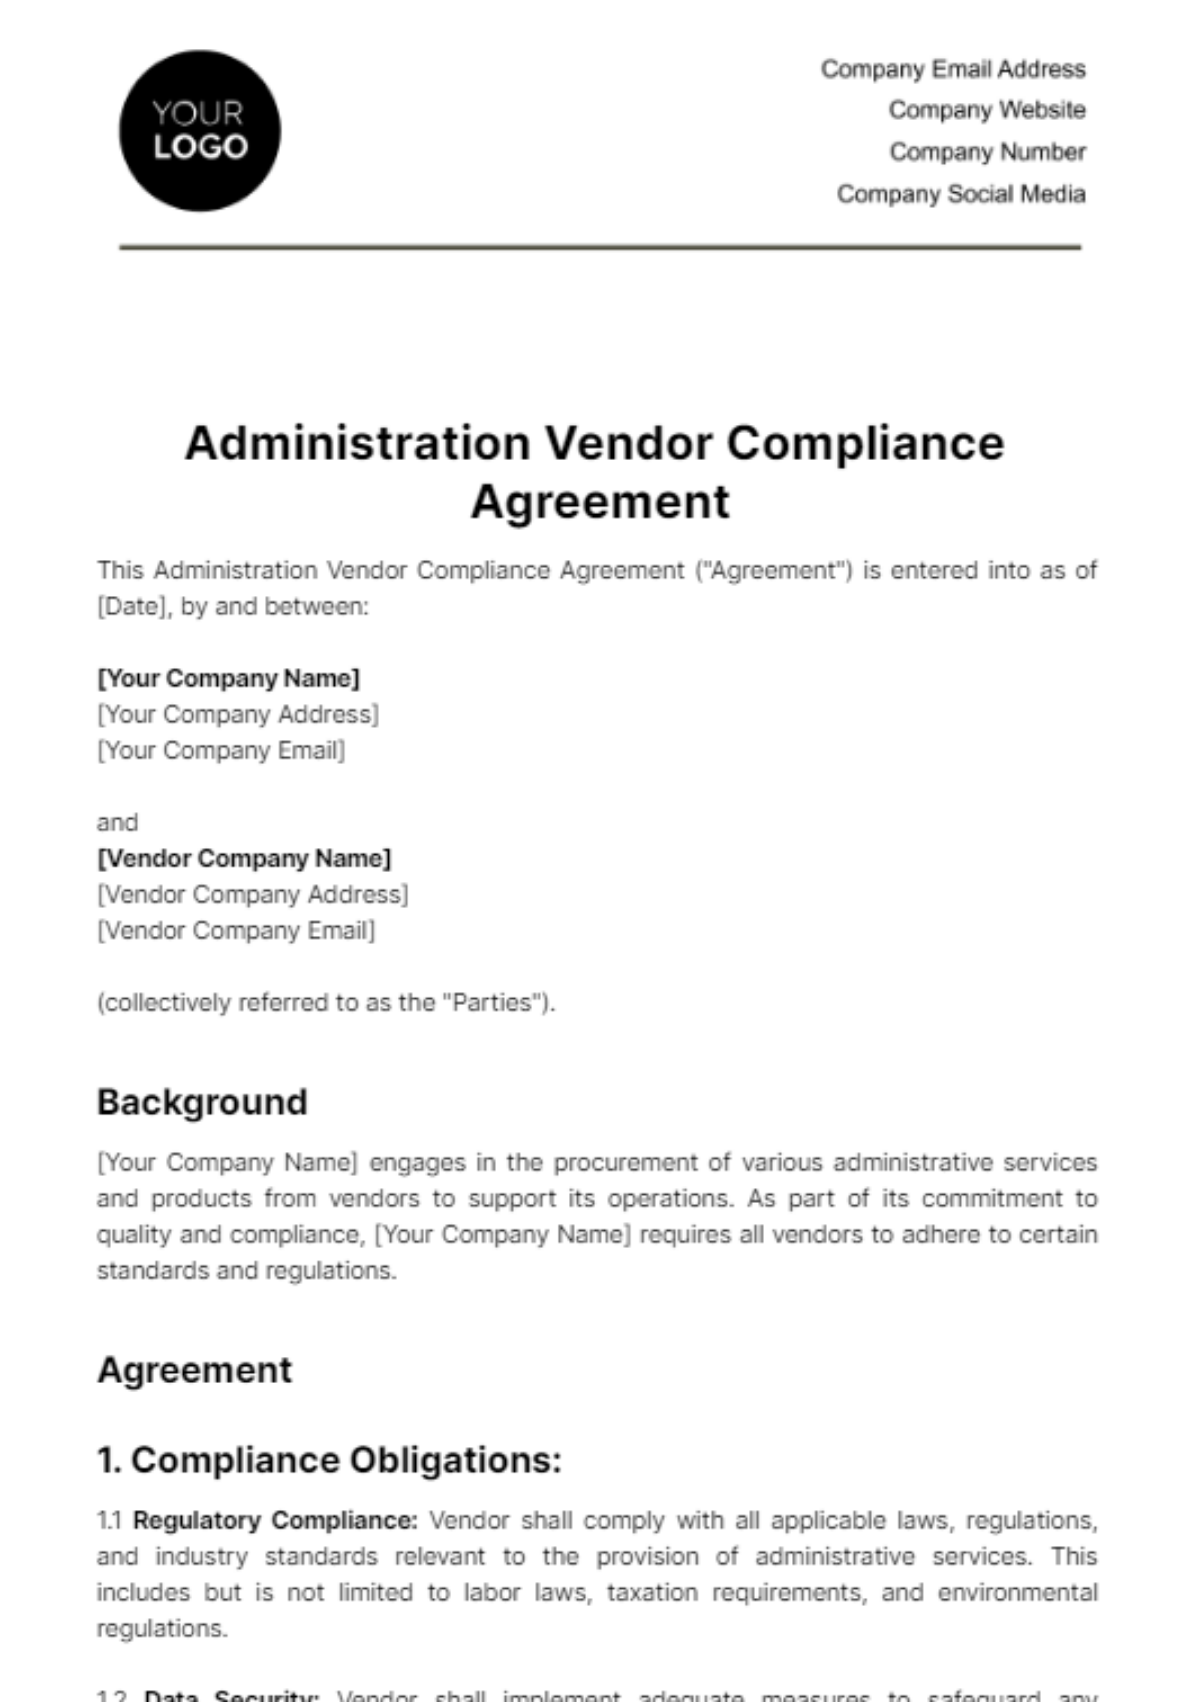 Free Administration Vendor Compliance Agreement Template